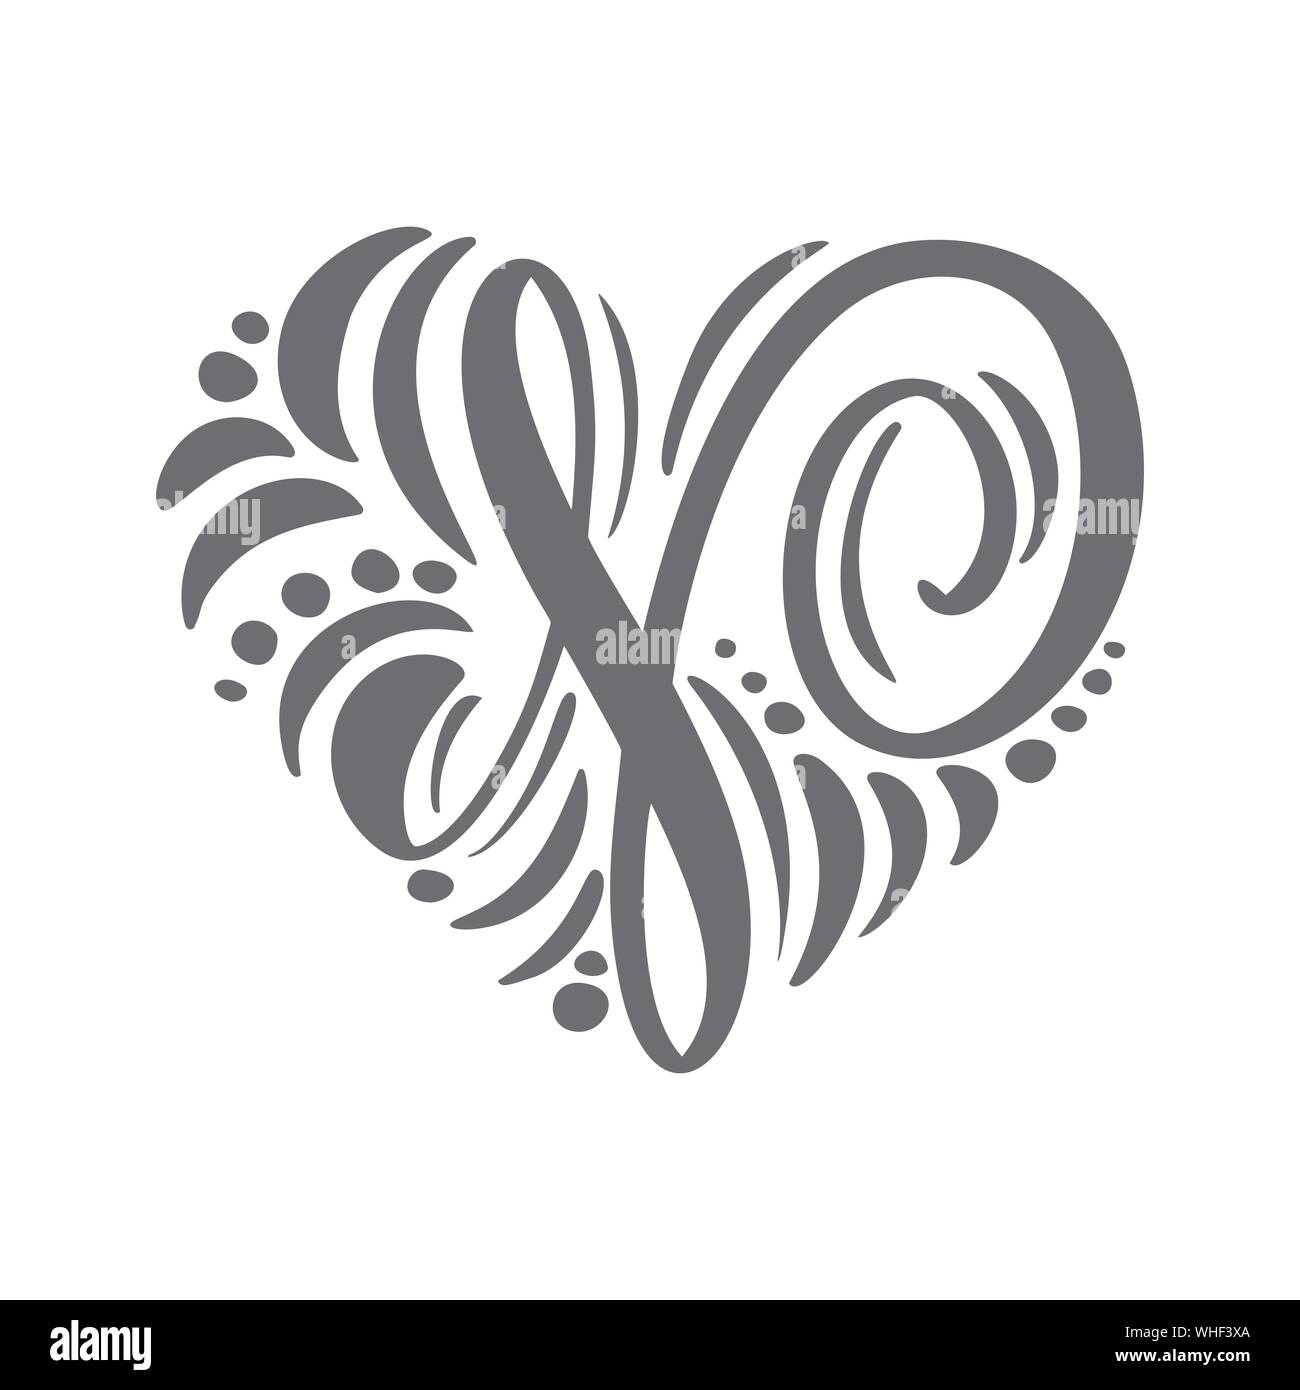 Heart love vector Hand Drawn calligraphic scandinavian floral N logo. Uppercase Hand Lettering Letter H with curl. Wedding Floral Design Stock Vector